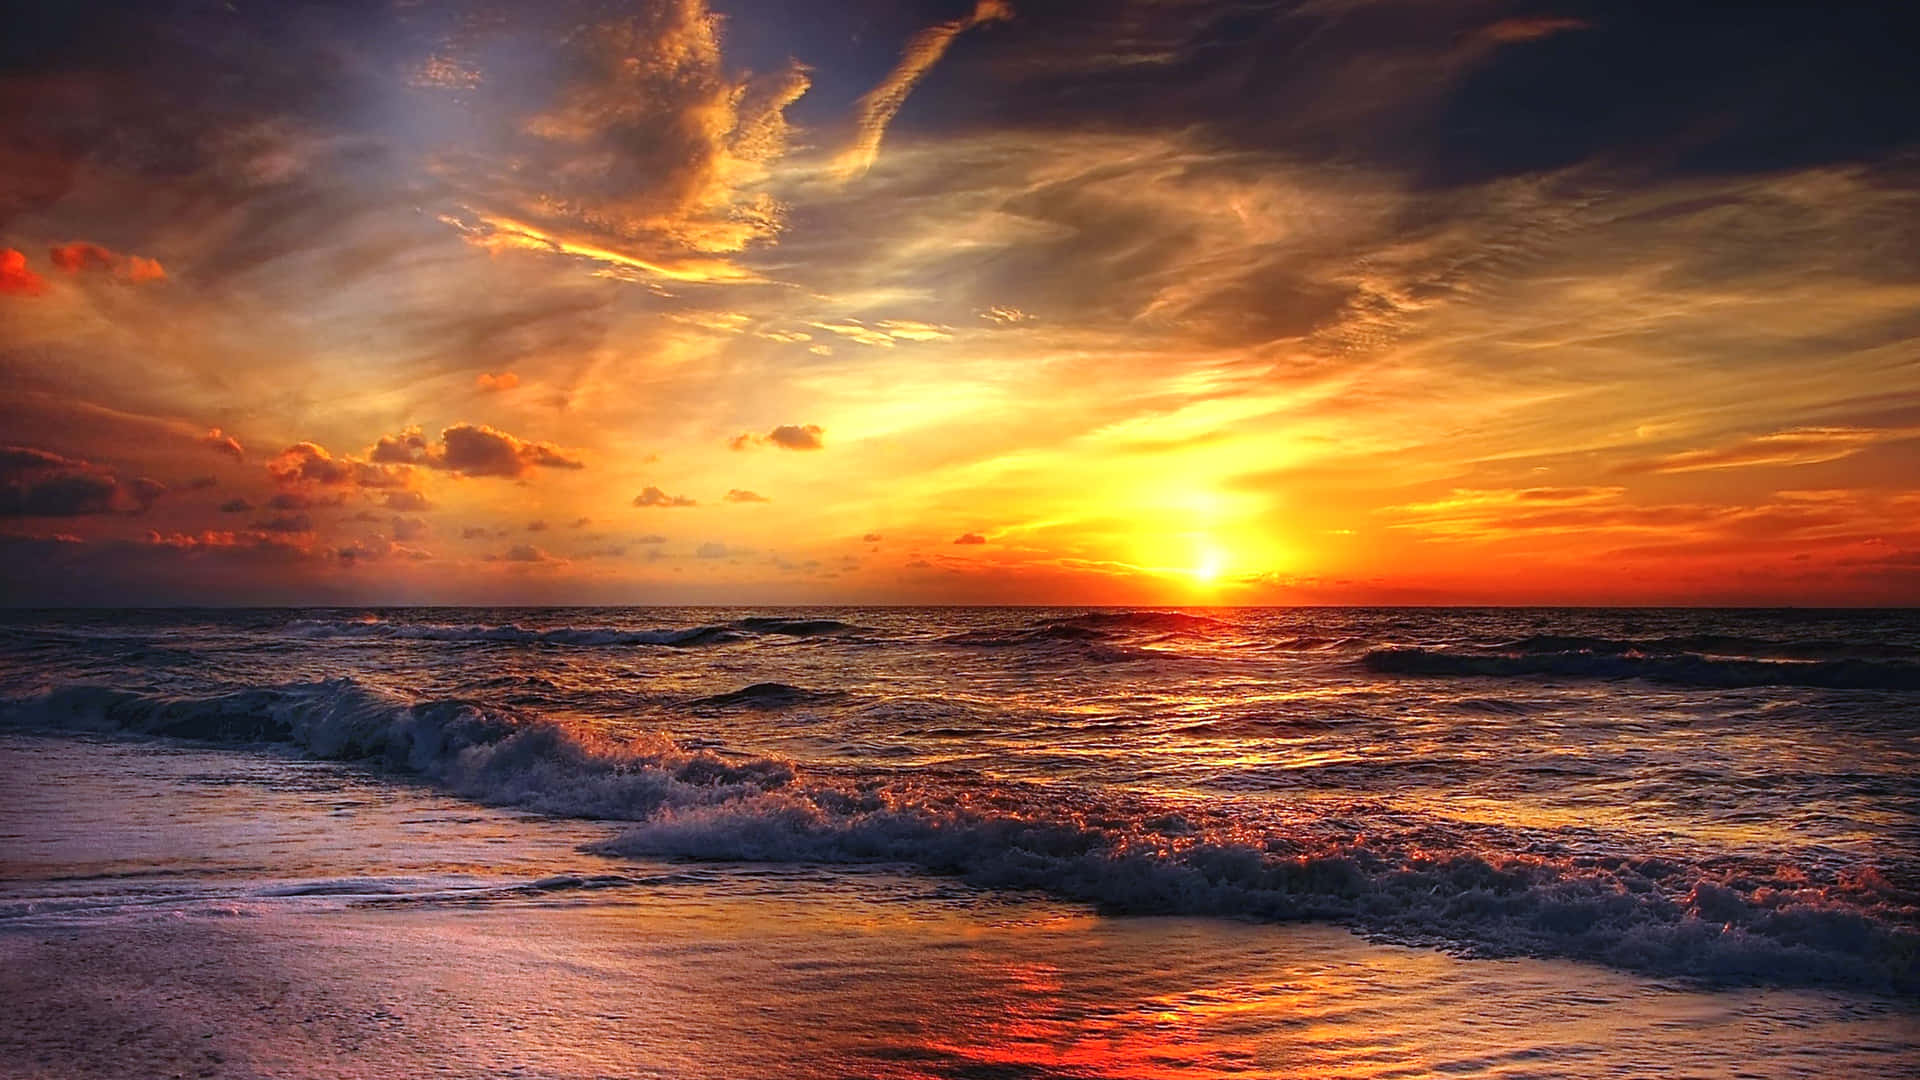 Free Sunrise Wallpaper Downloads, [400+] Sunrise Wallpapers for FREE |  